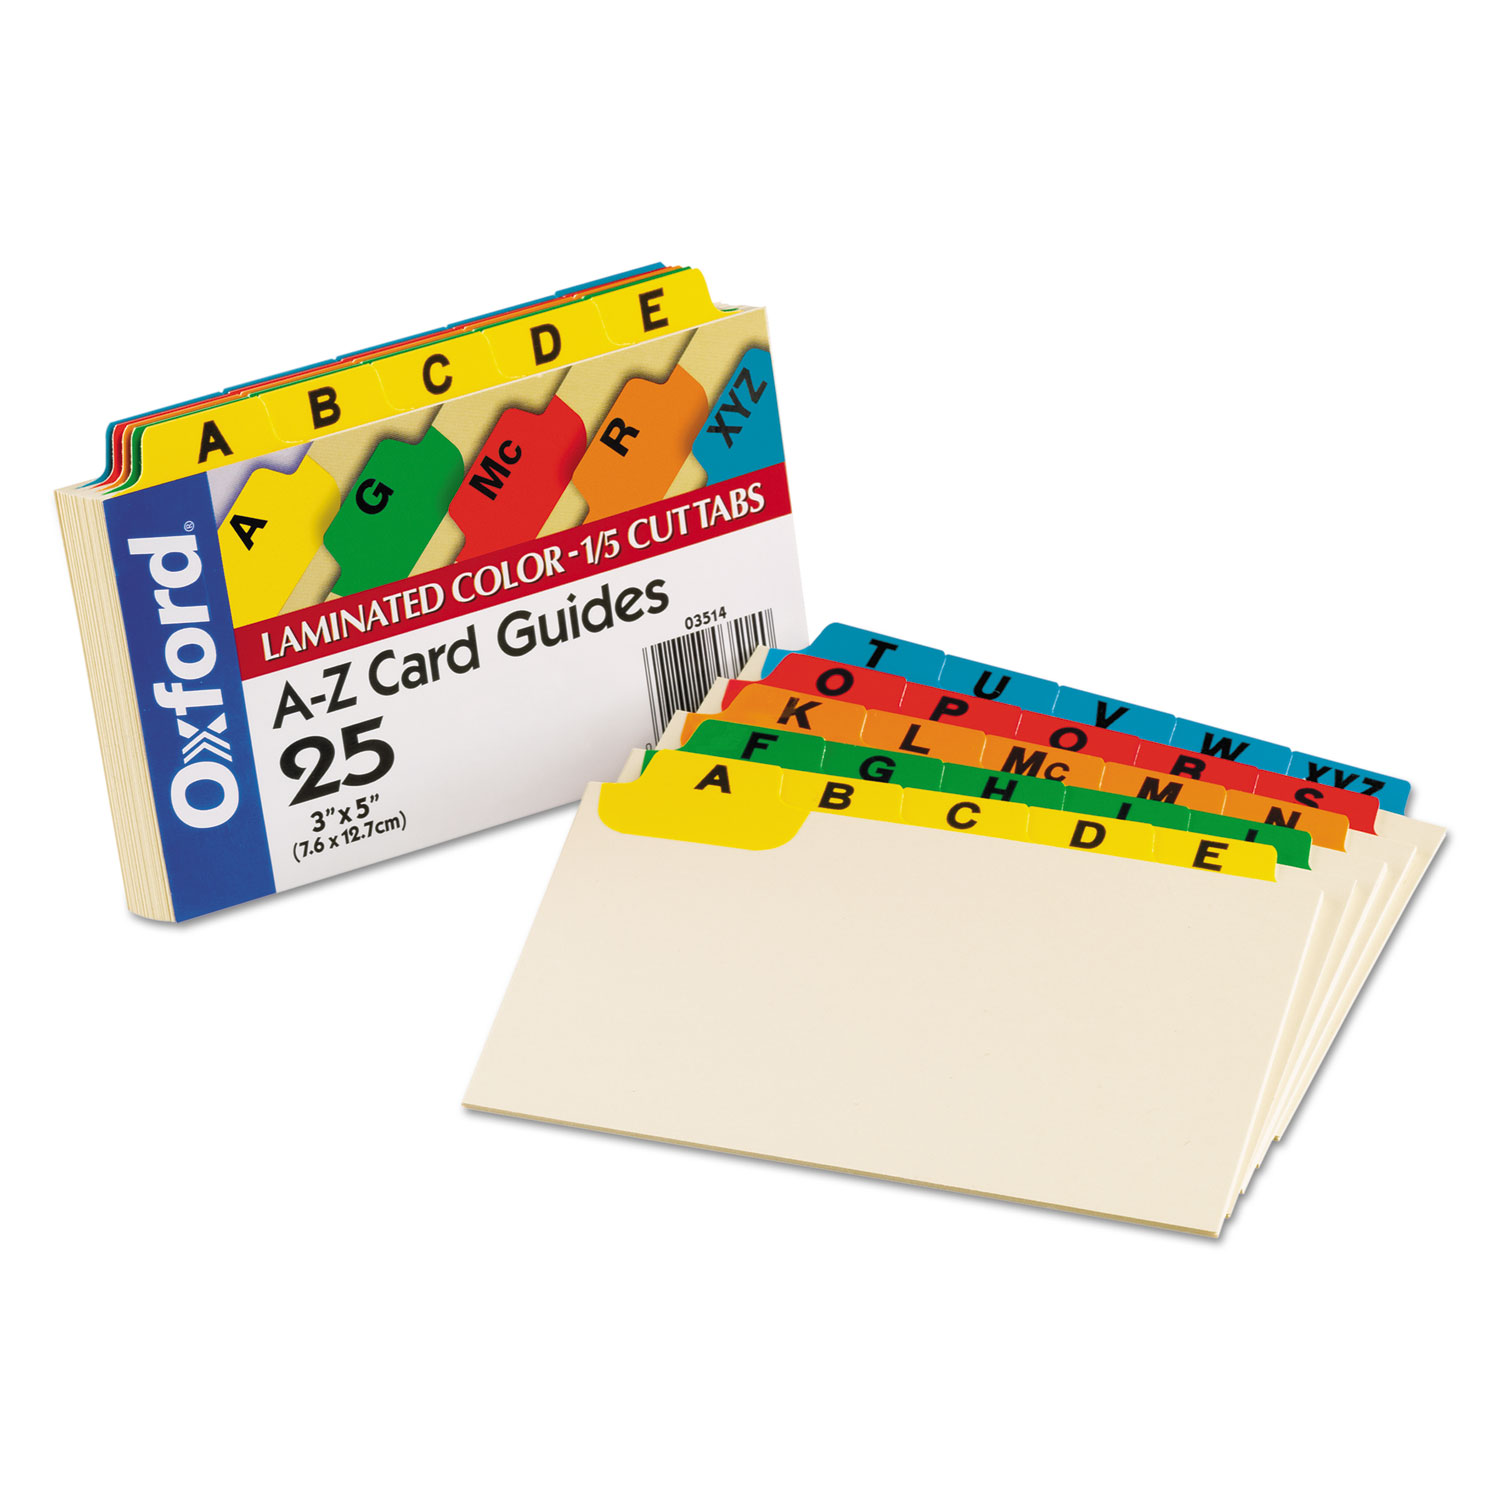 Oxford Ruled Index Cards - Zerbee